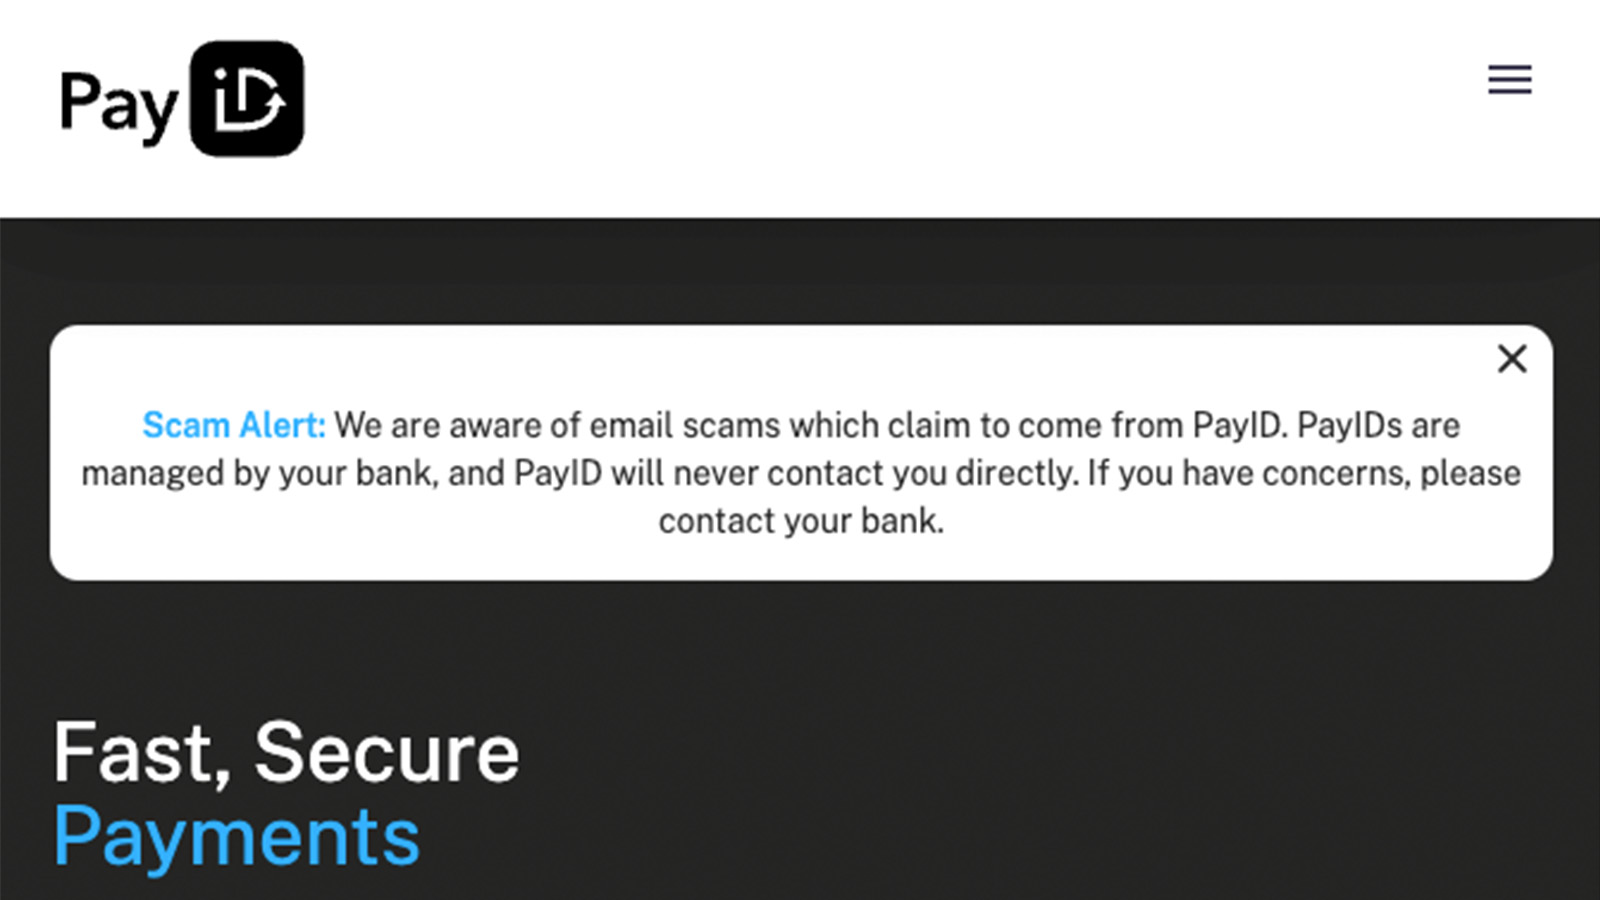 PayID homepage alerting users to ongoing scams